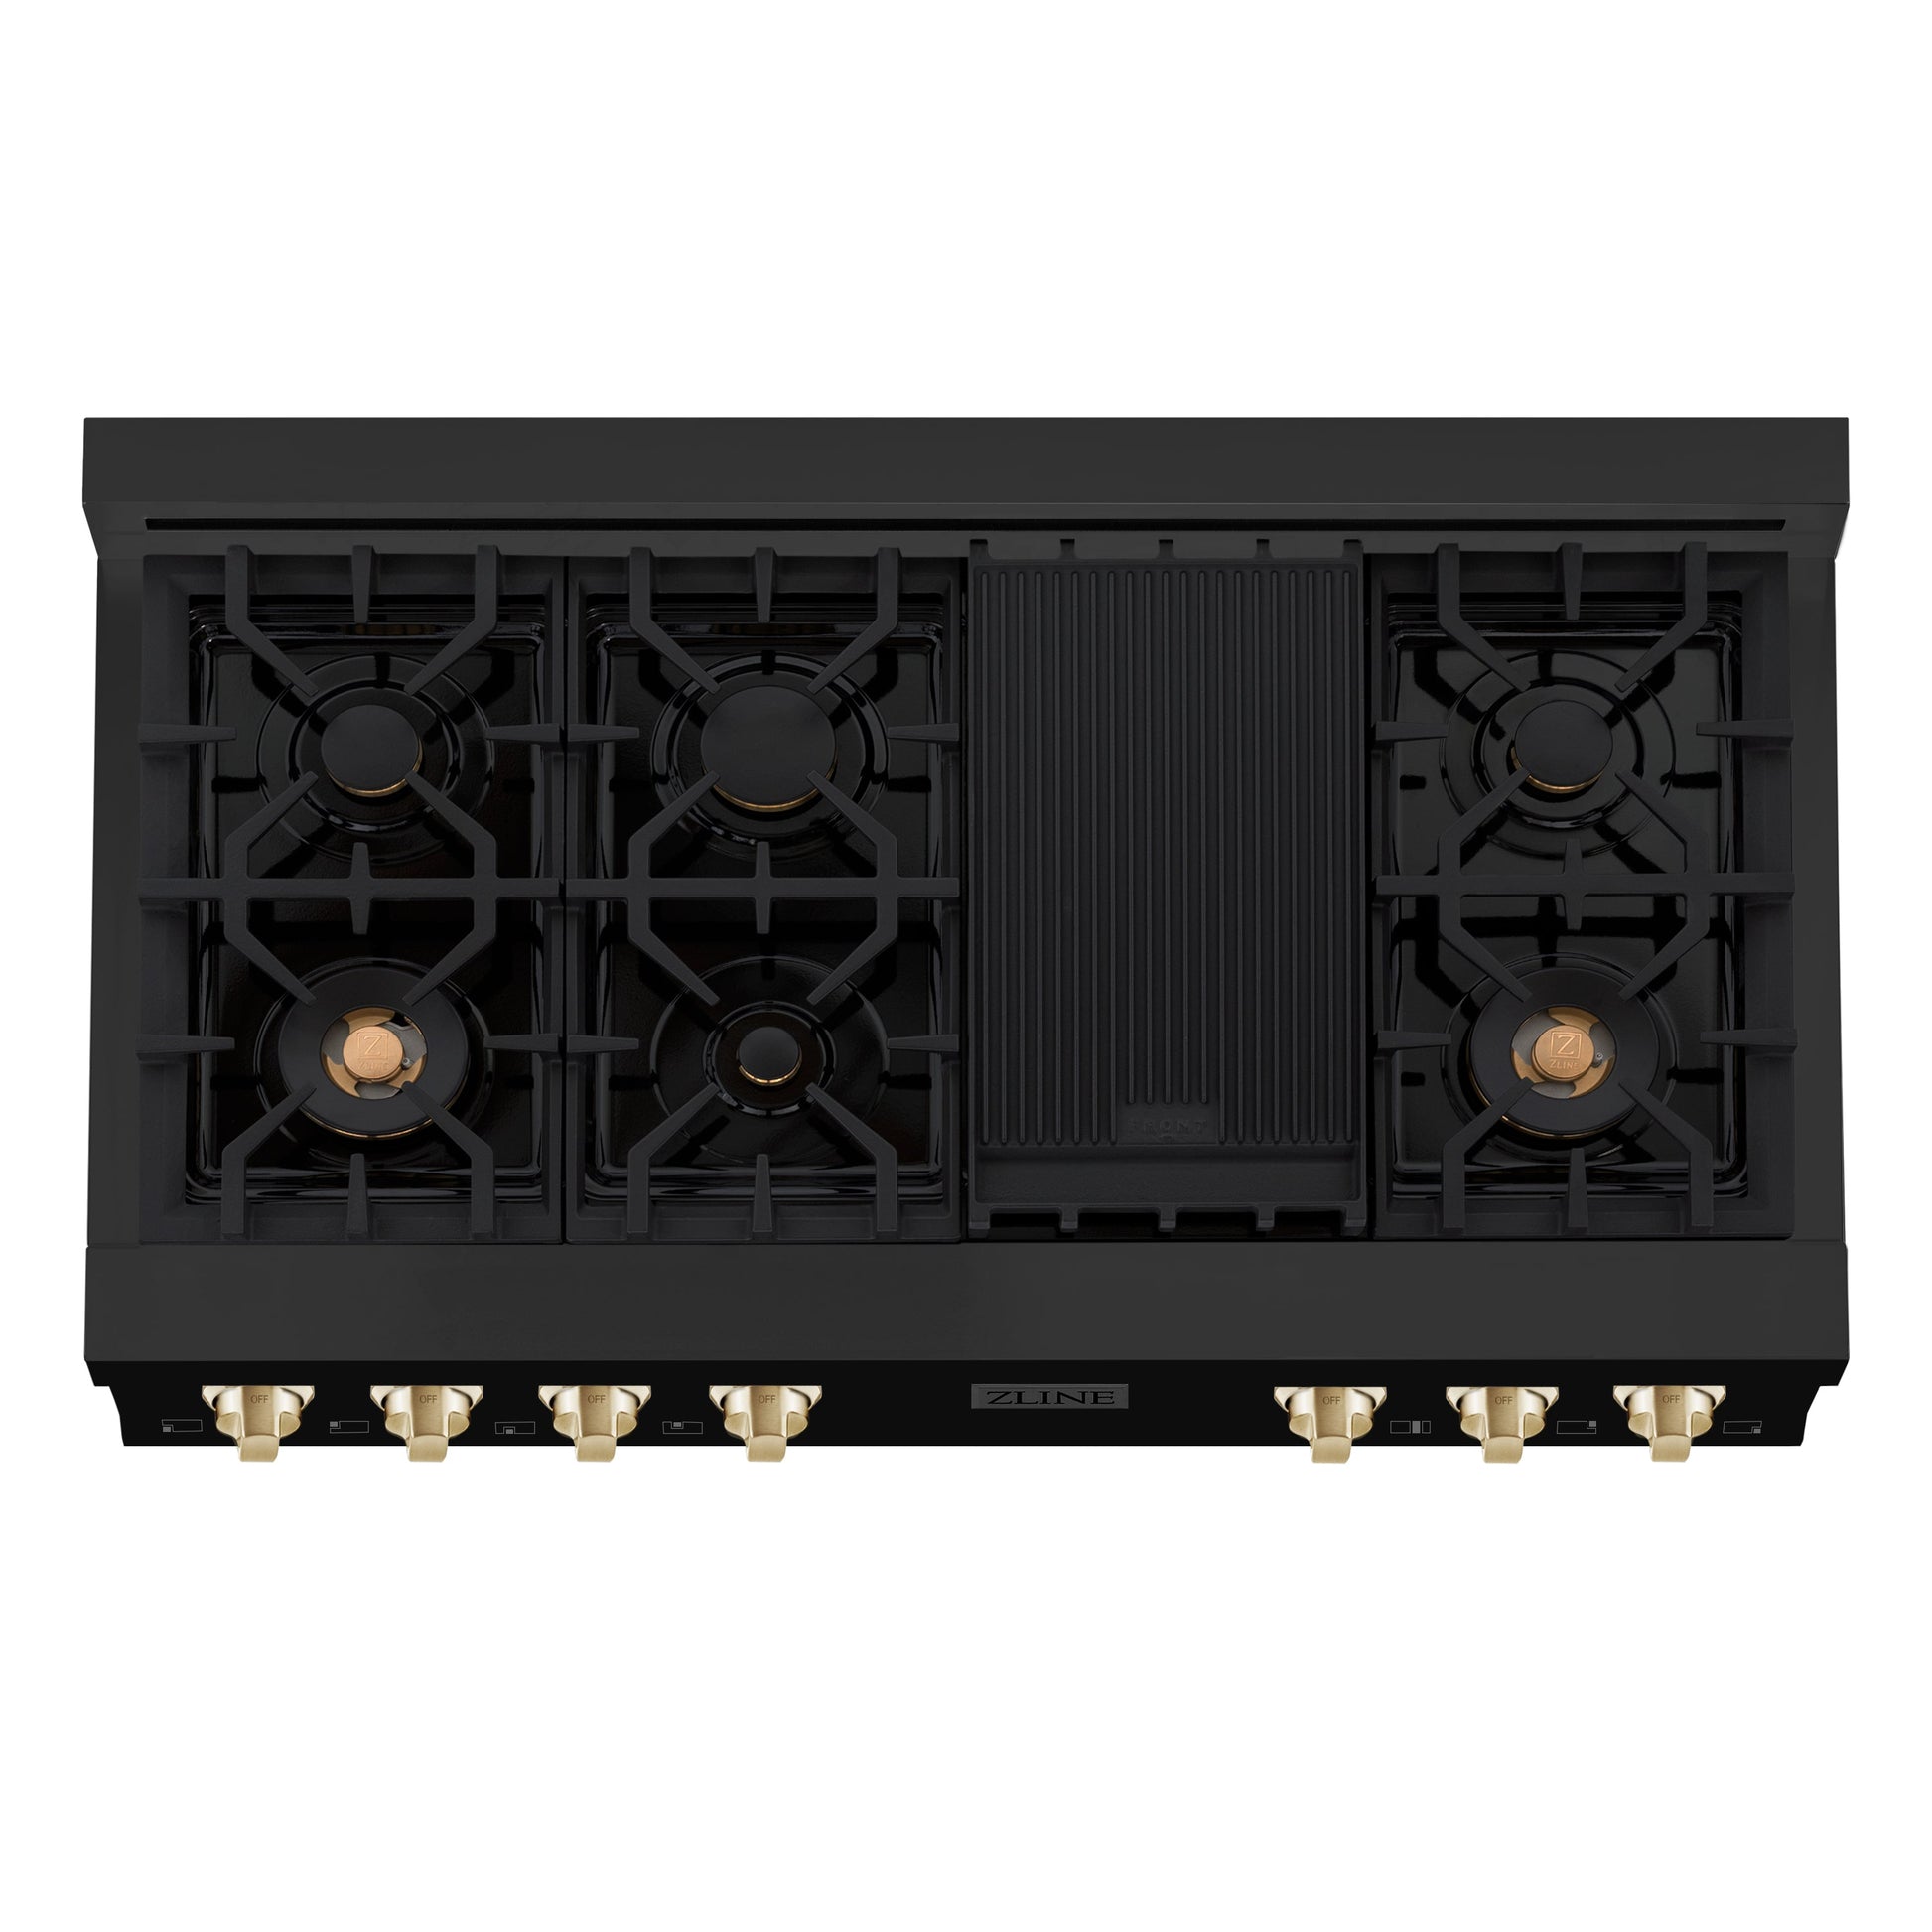 ZLINE Autograph Edition 48" Porcelain 7 Burner Gas Rangetop - Black Stainless Steel with Accents